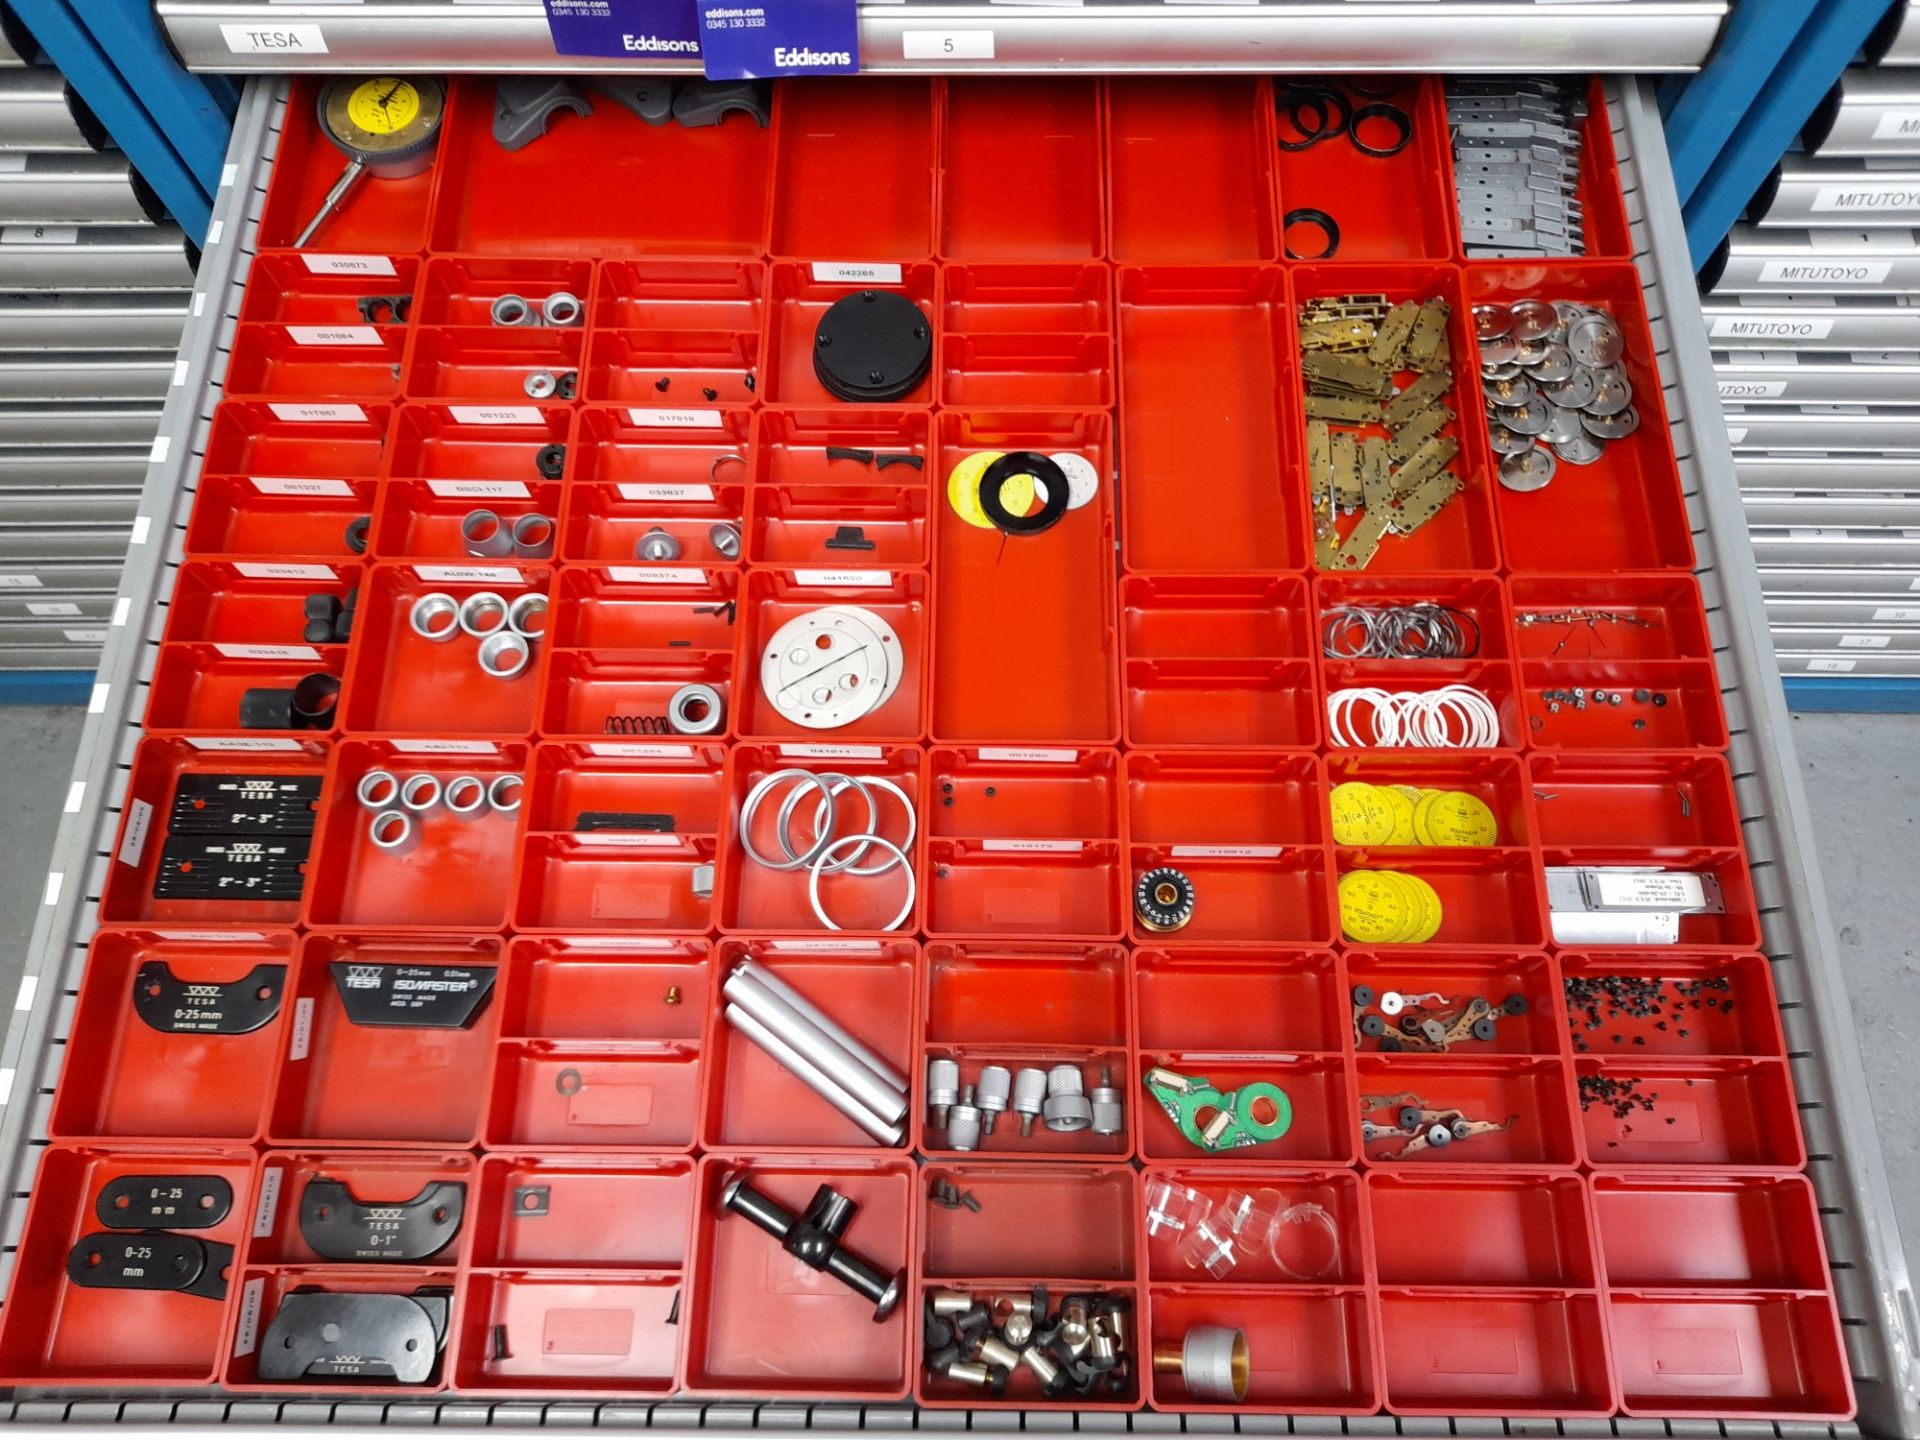 Tesa Spares Drawers 1-6 (cabinet excluded) - Image 6 of 7